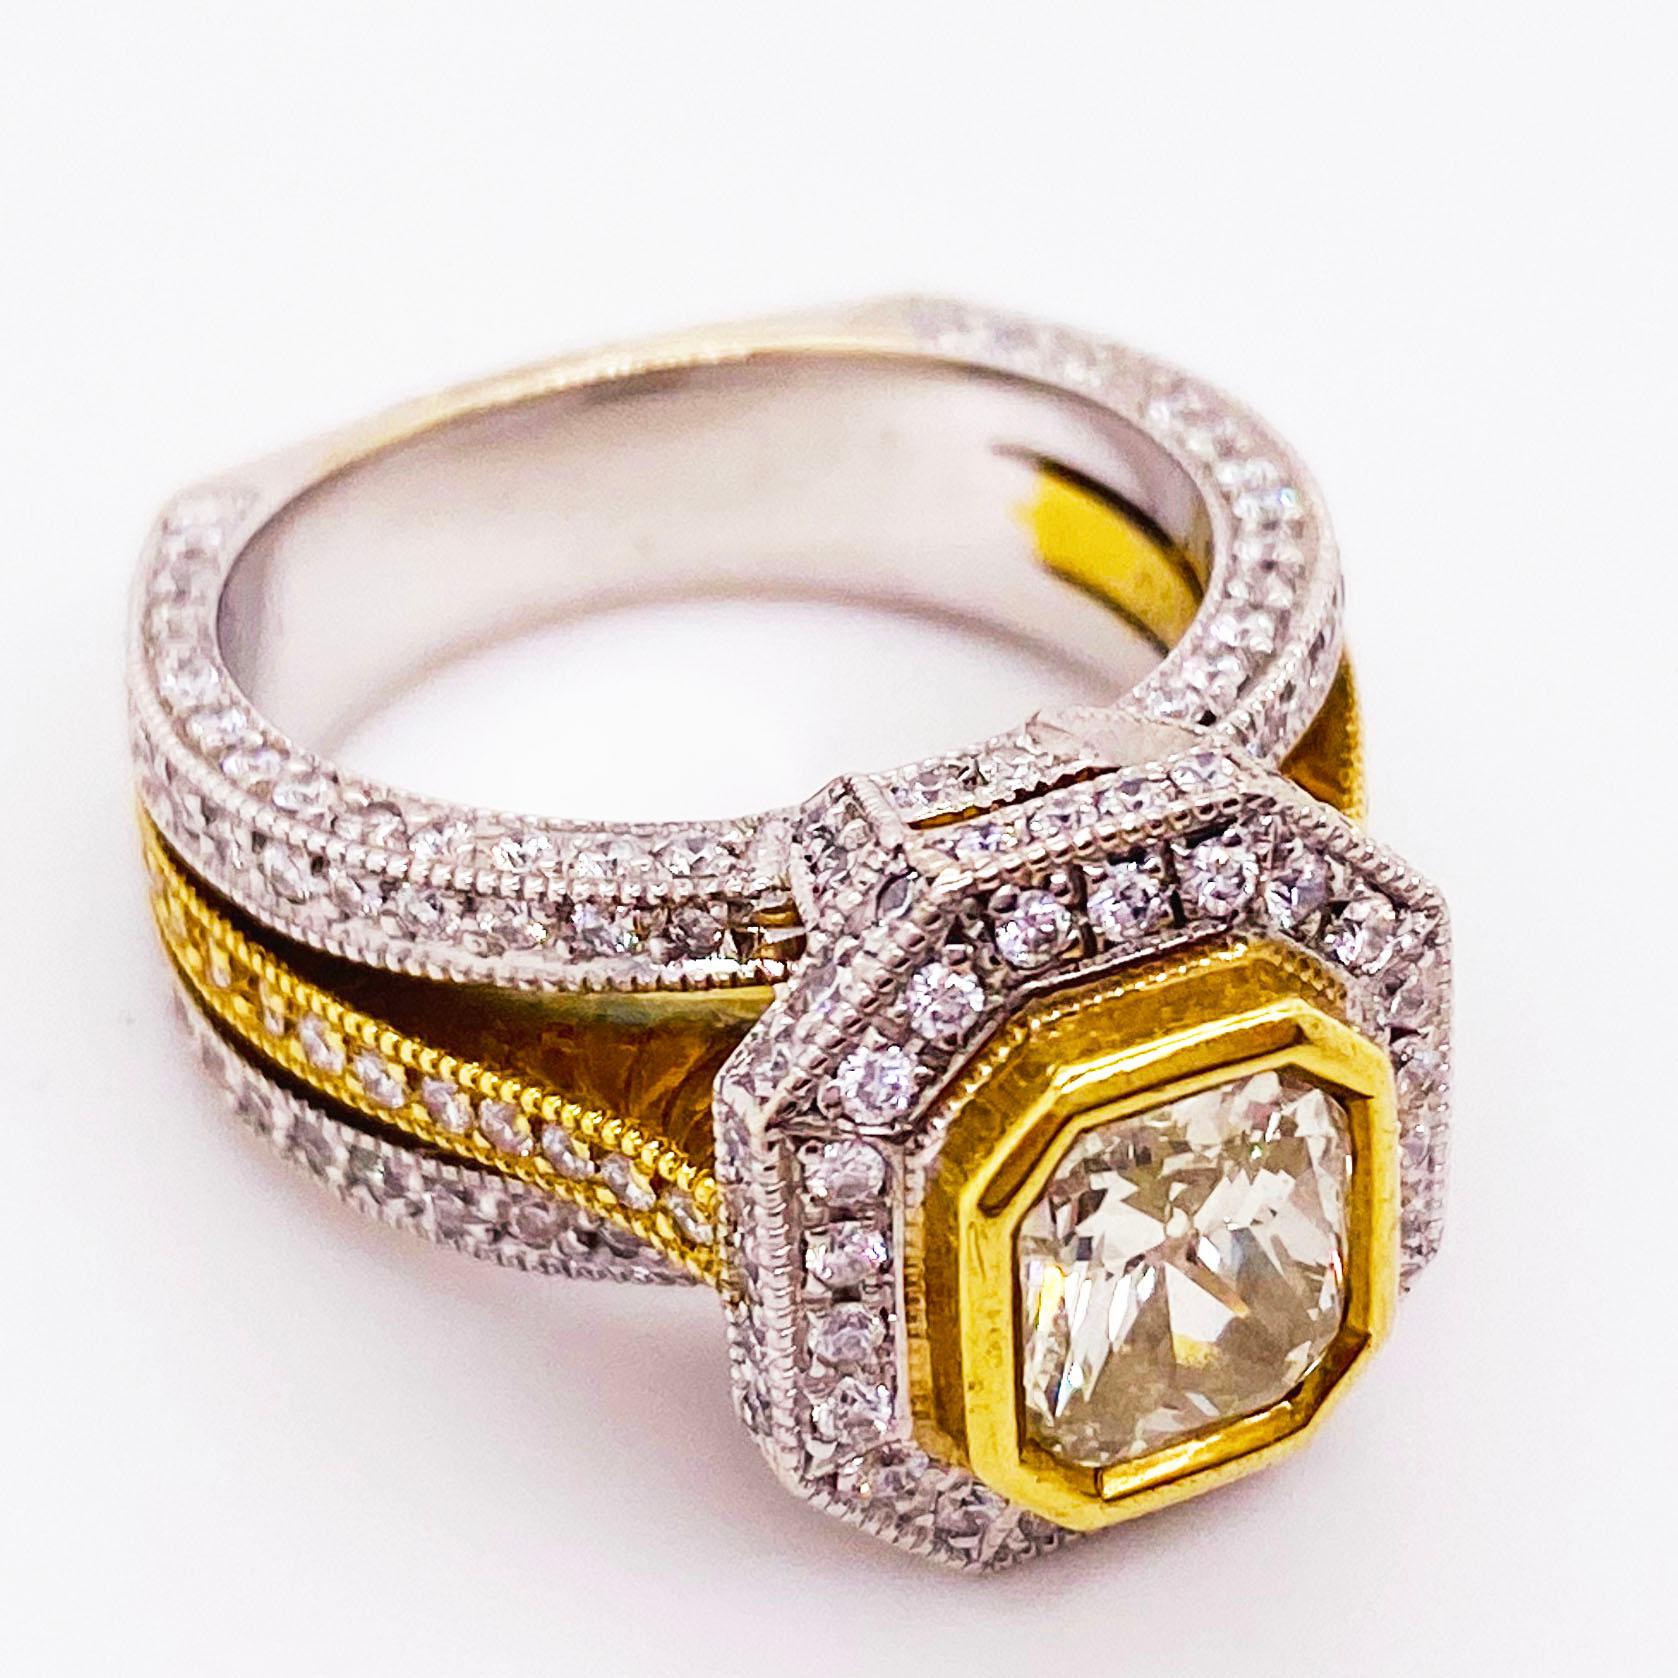 Stunning Fancy Yellow Diamond Ring! This custom piece is a one of a kind fine jewelry piece custom made with a radiant yellow diamond, white round brilliant diamonds and 18 karat gold precious metals. 
The center diamond is a Fancy Yellow Diamond